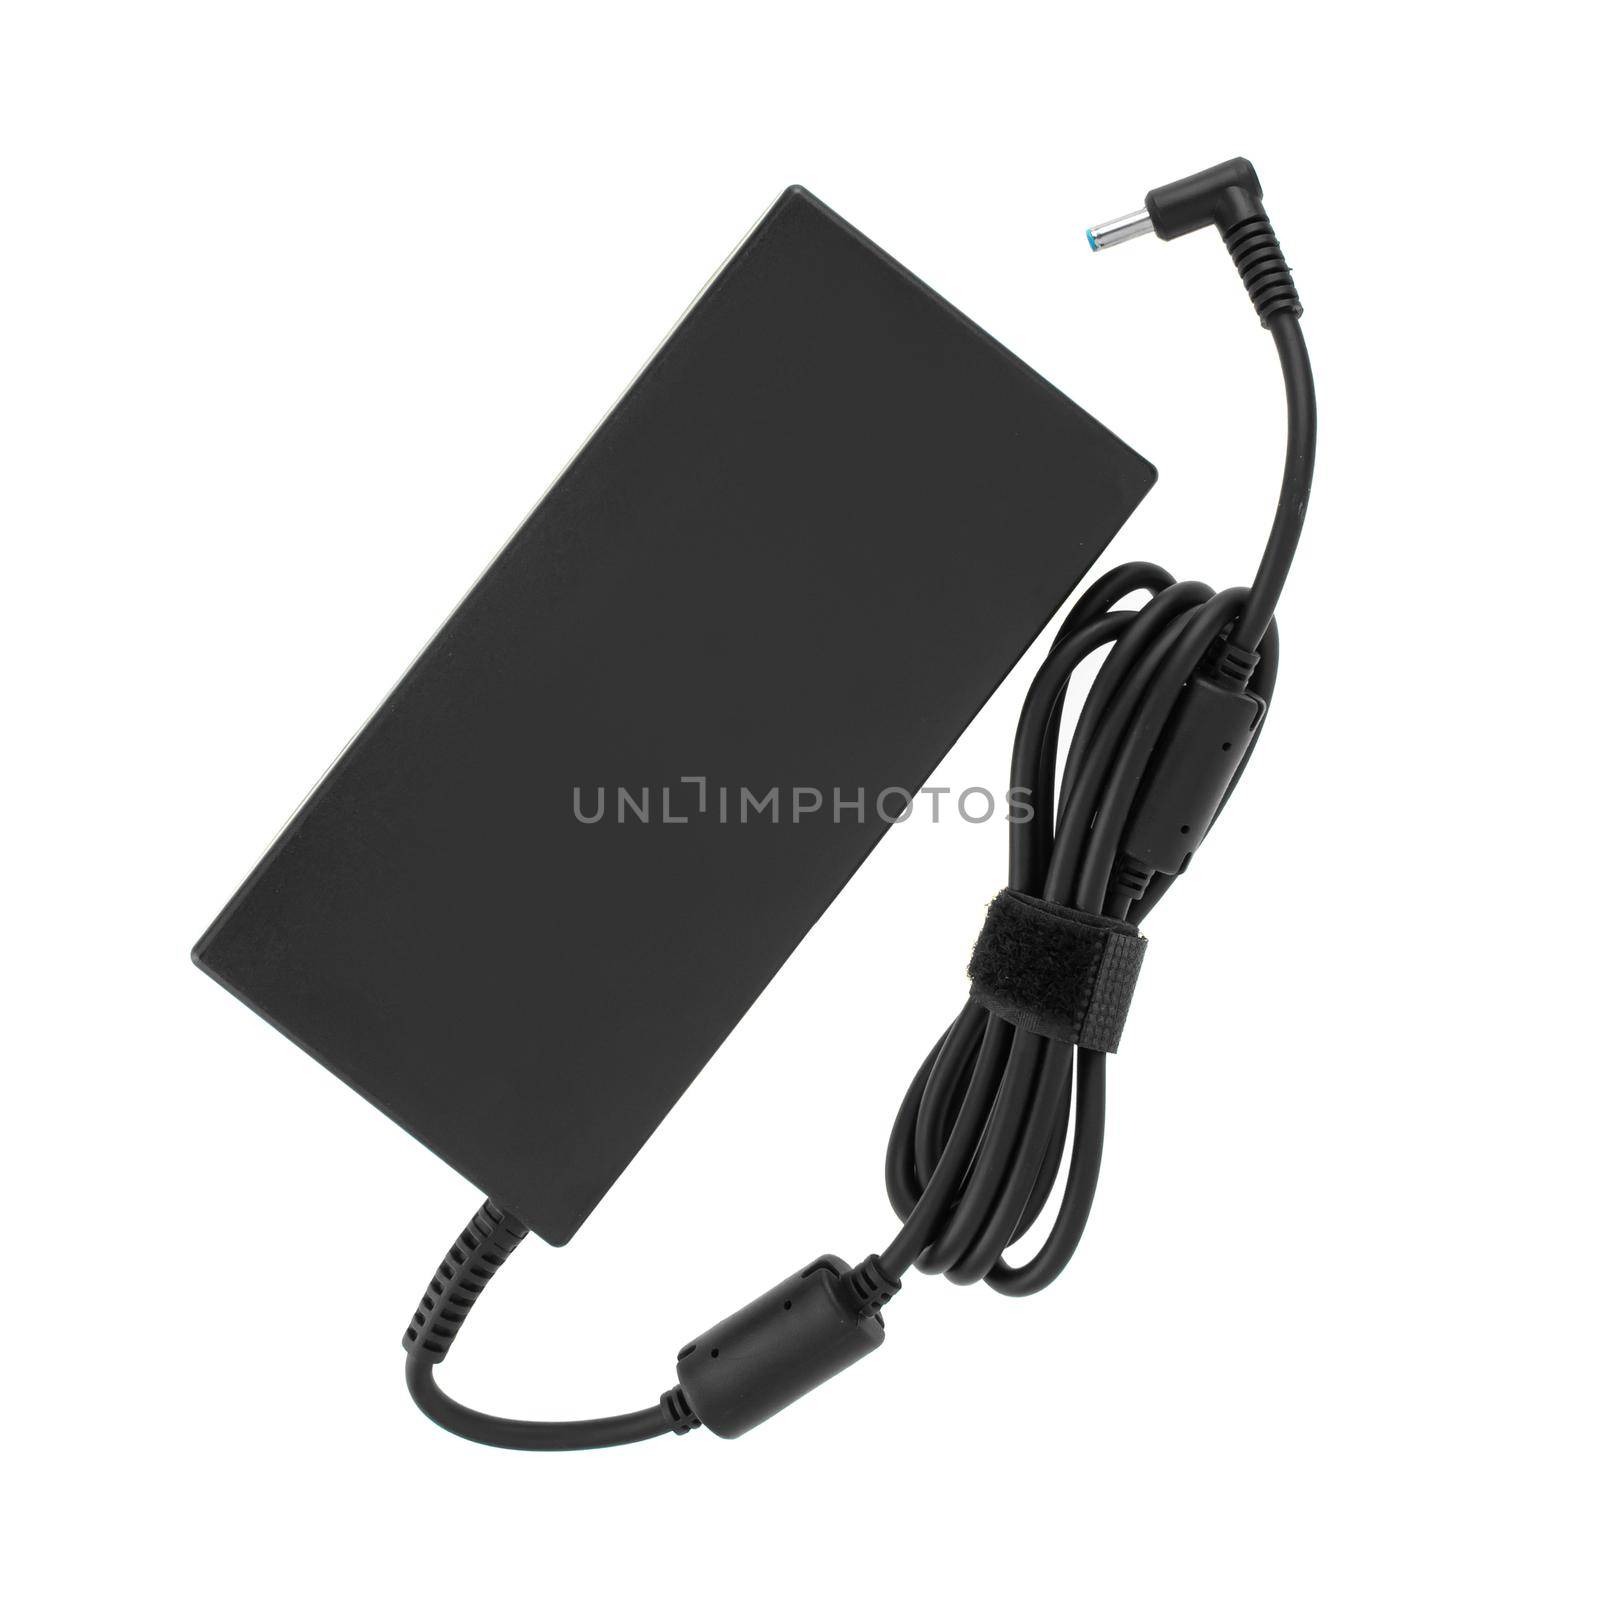 laptop power adapter, laptop accessory, isolated on white background